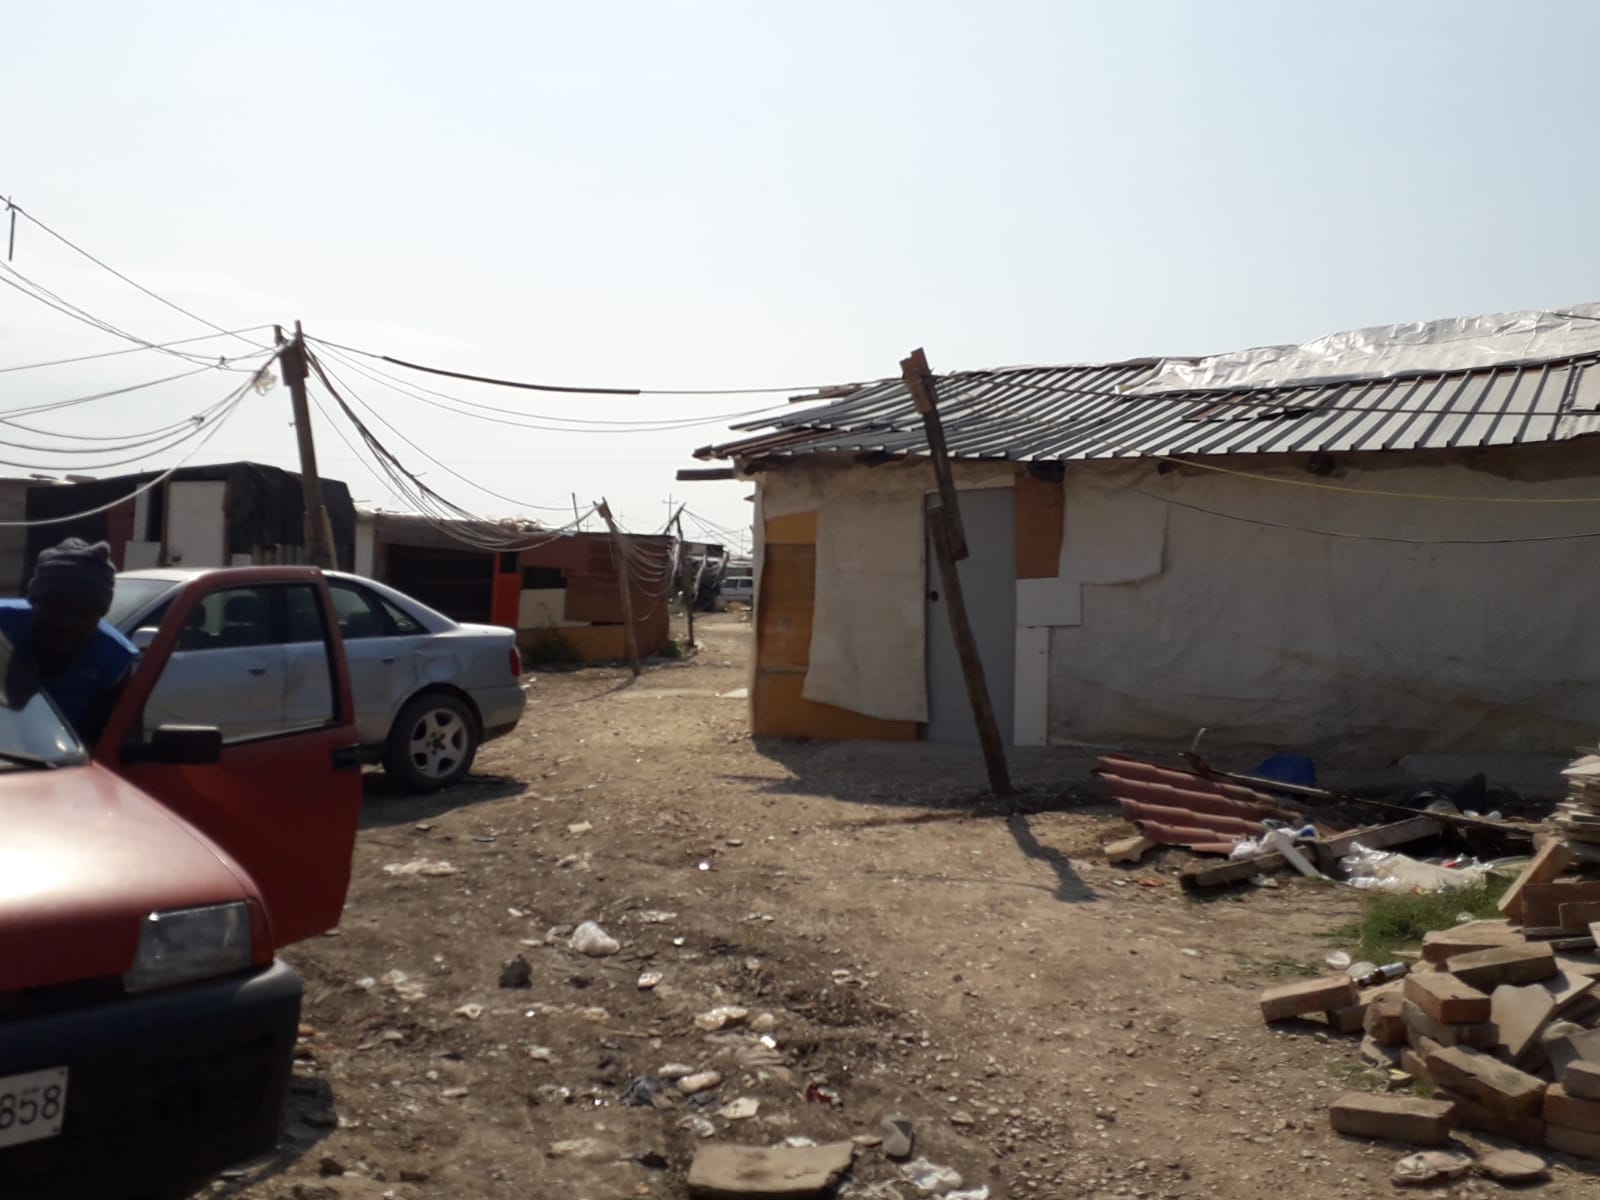   The shantytown near the Foggia housing camp where Alagie’s friend was stabbed to death; July, 2018. © Pamela Kerpius  